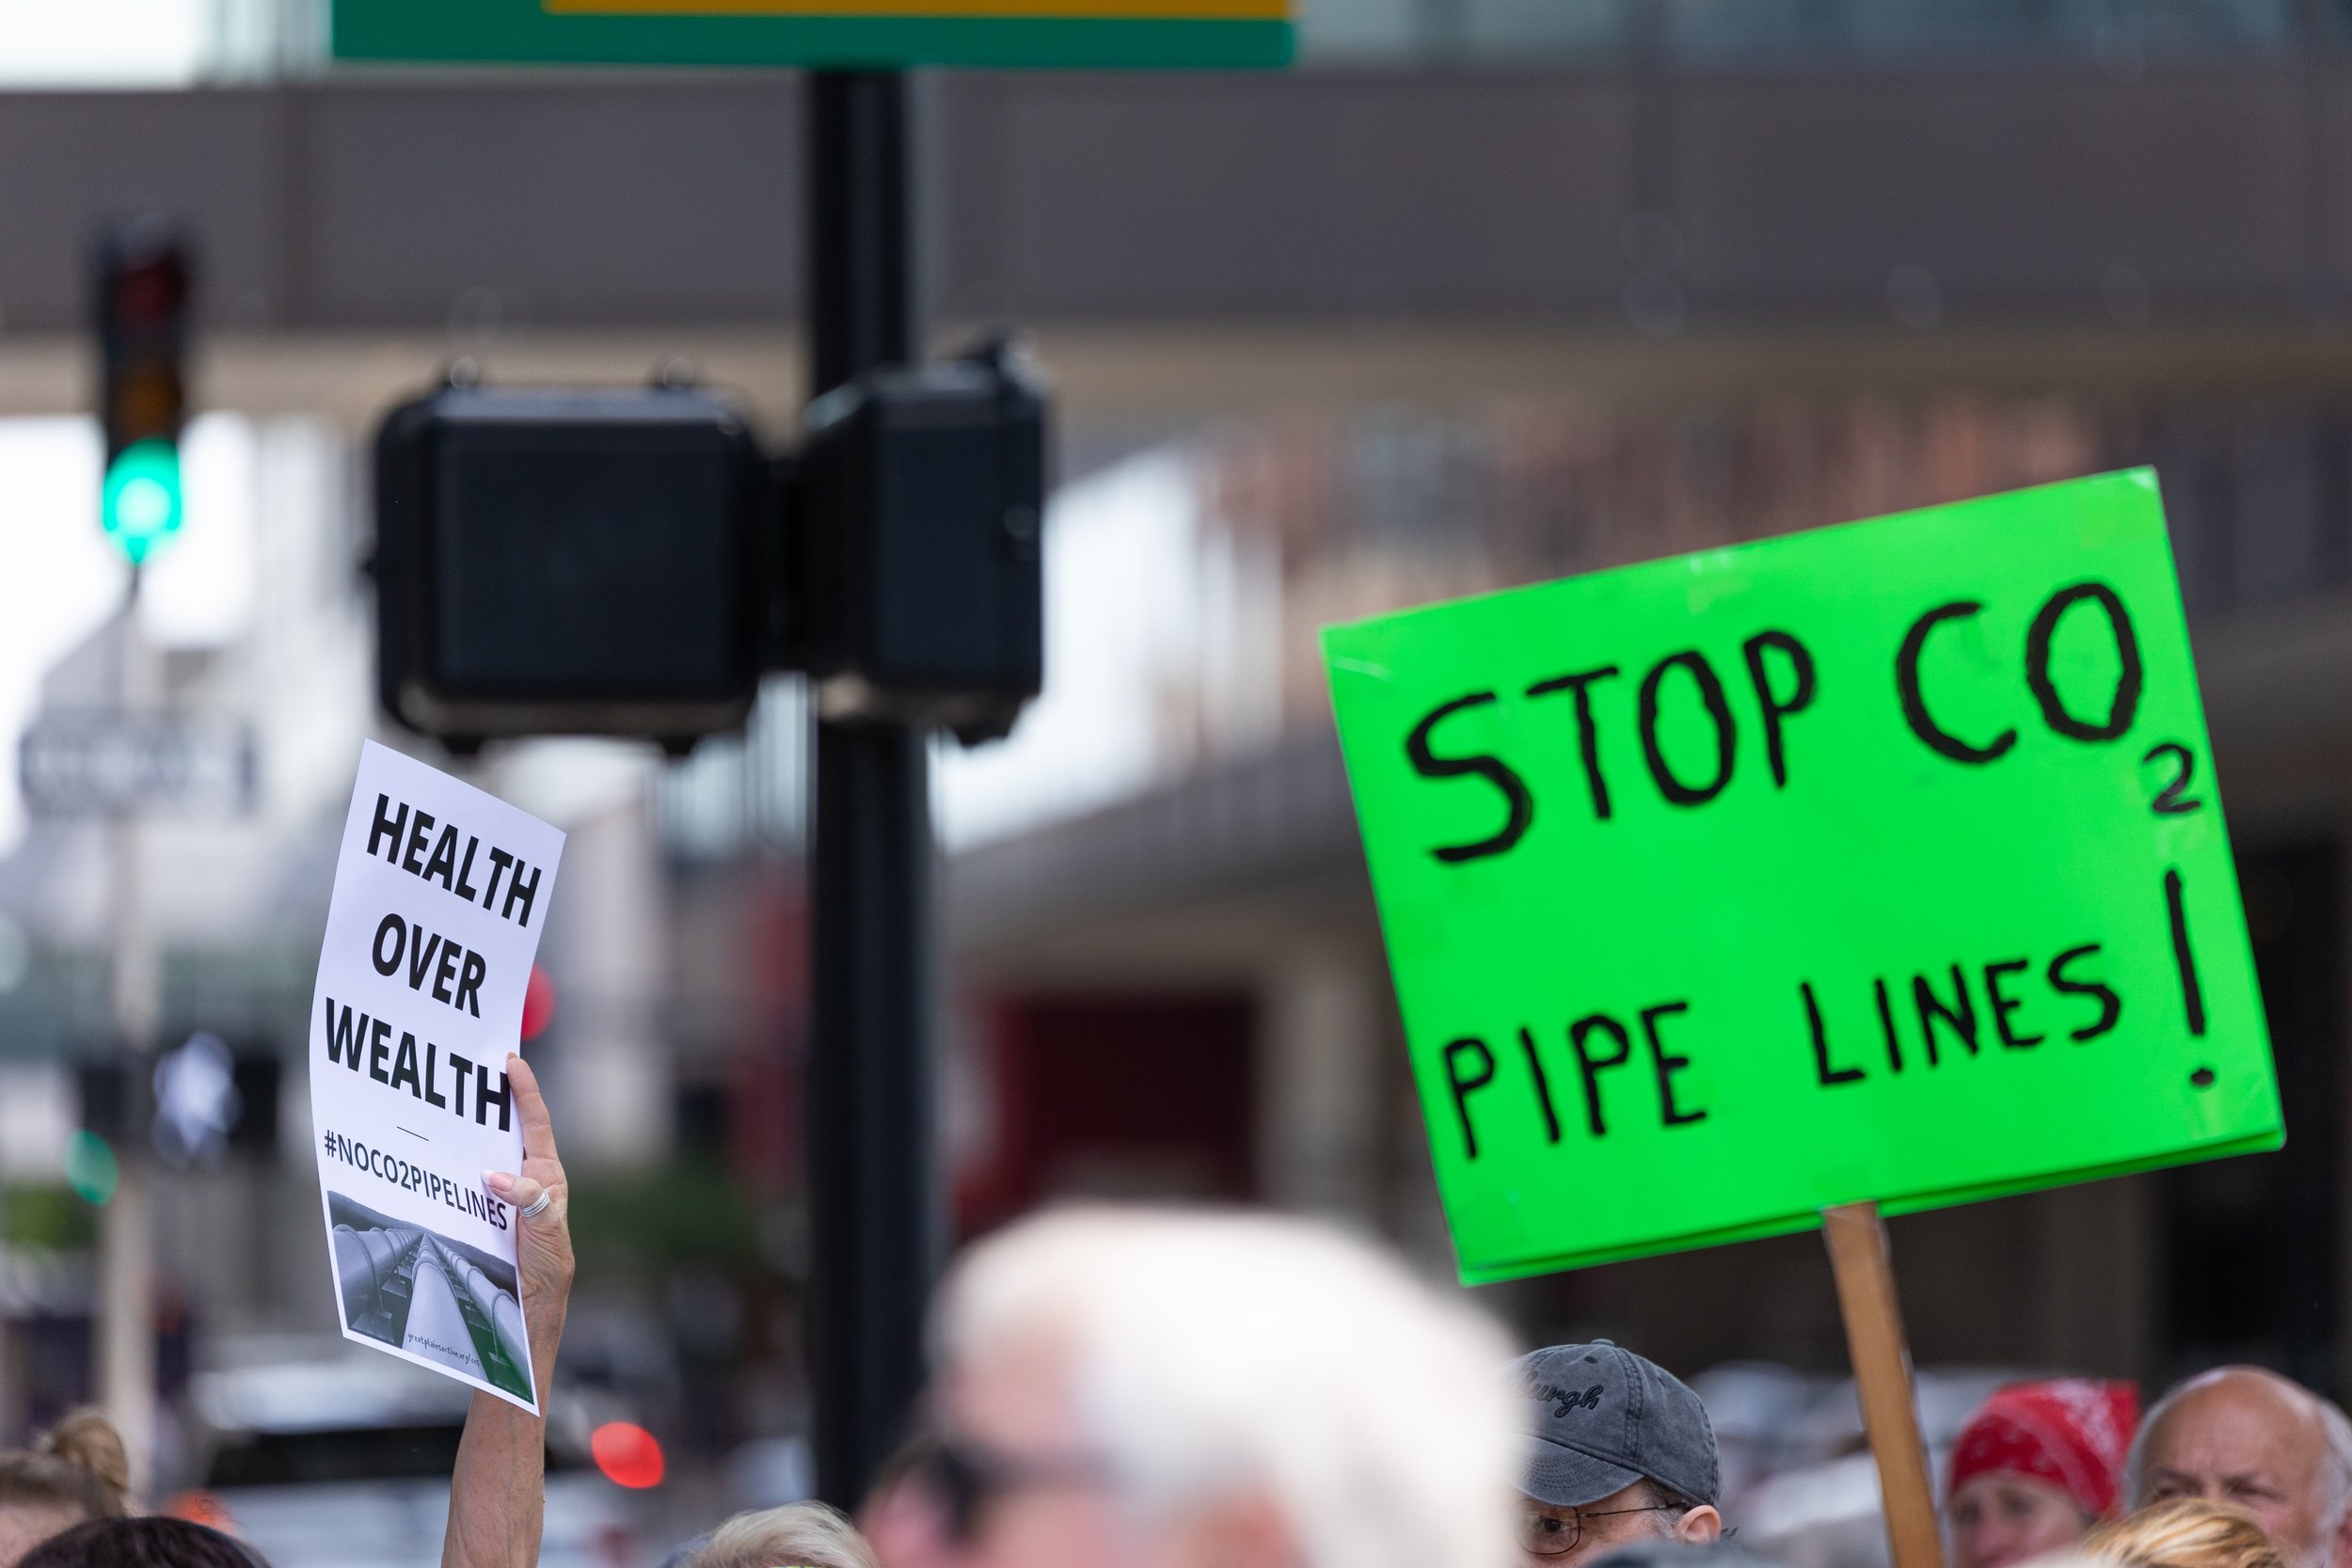 Victory! Navigator CO2 cancels proposed pipeline project